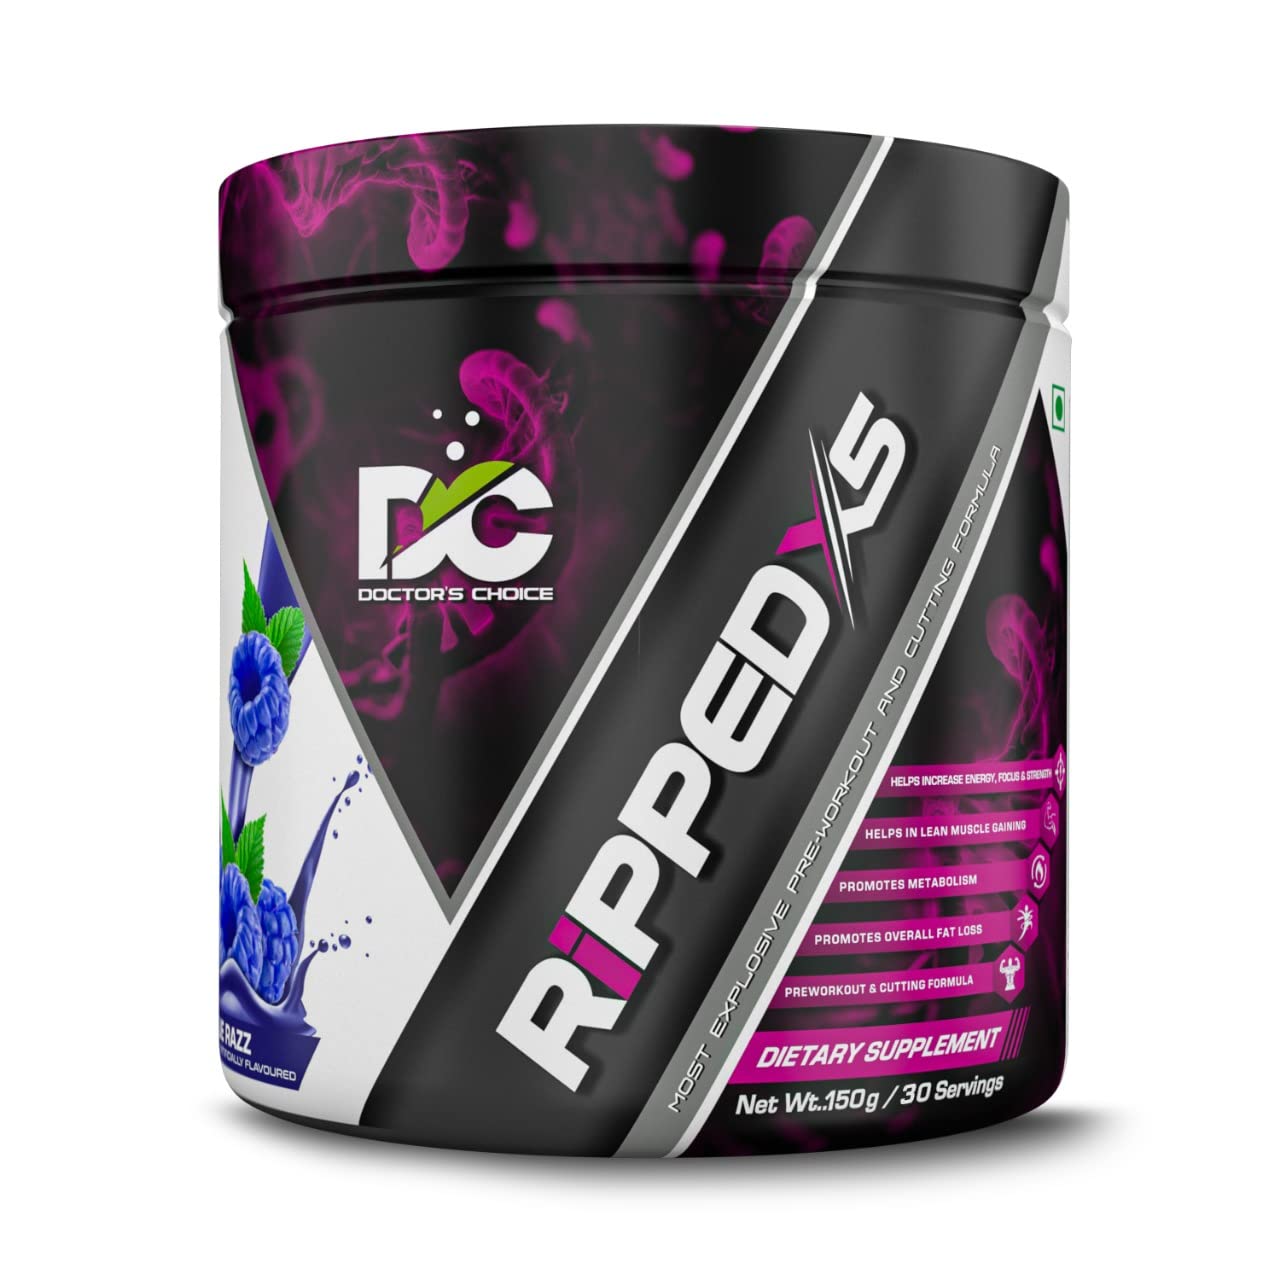 DOCTORS CHOICE Pre Workout RIPPED - X5 Most Explosive Pre Workout